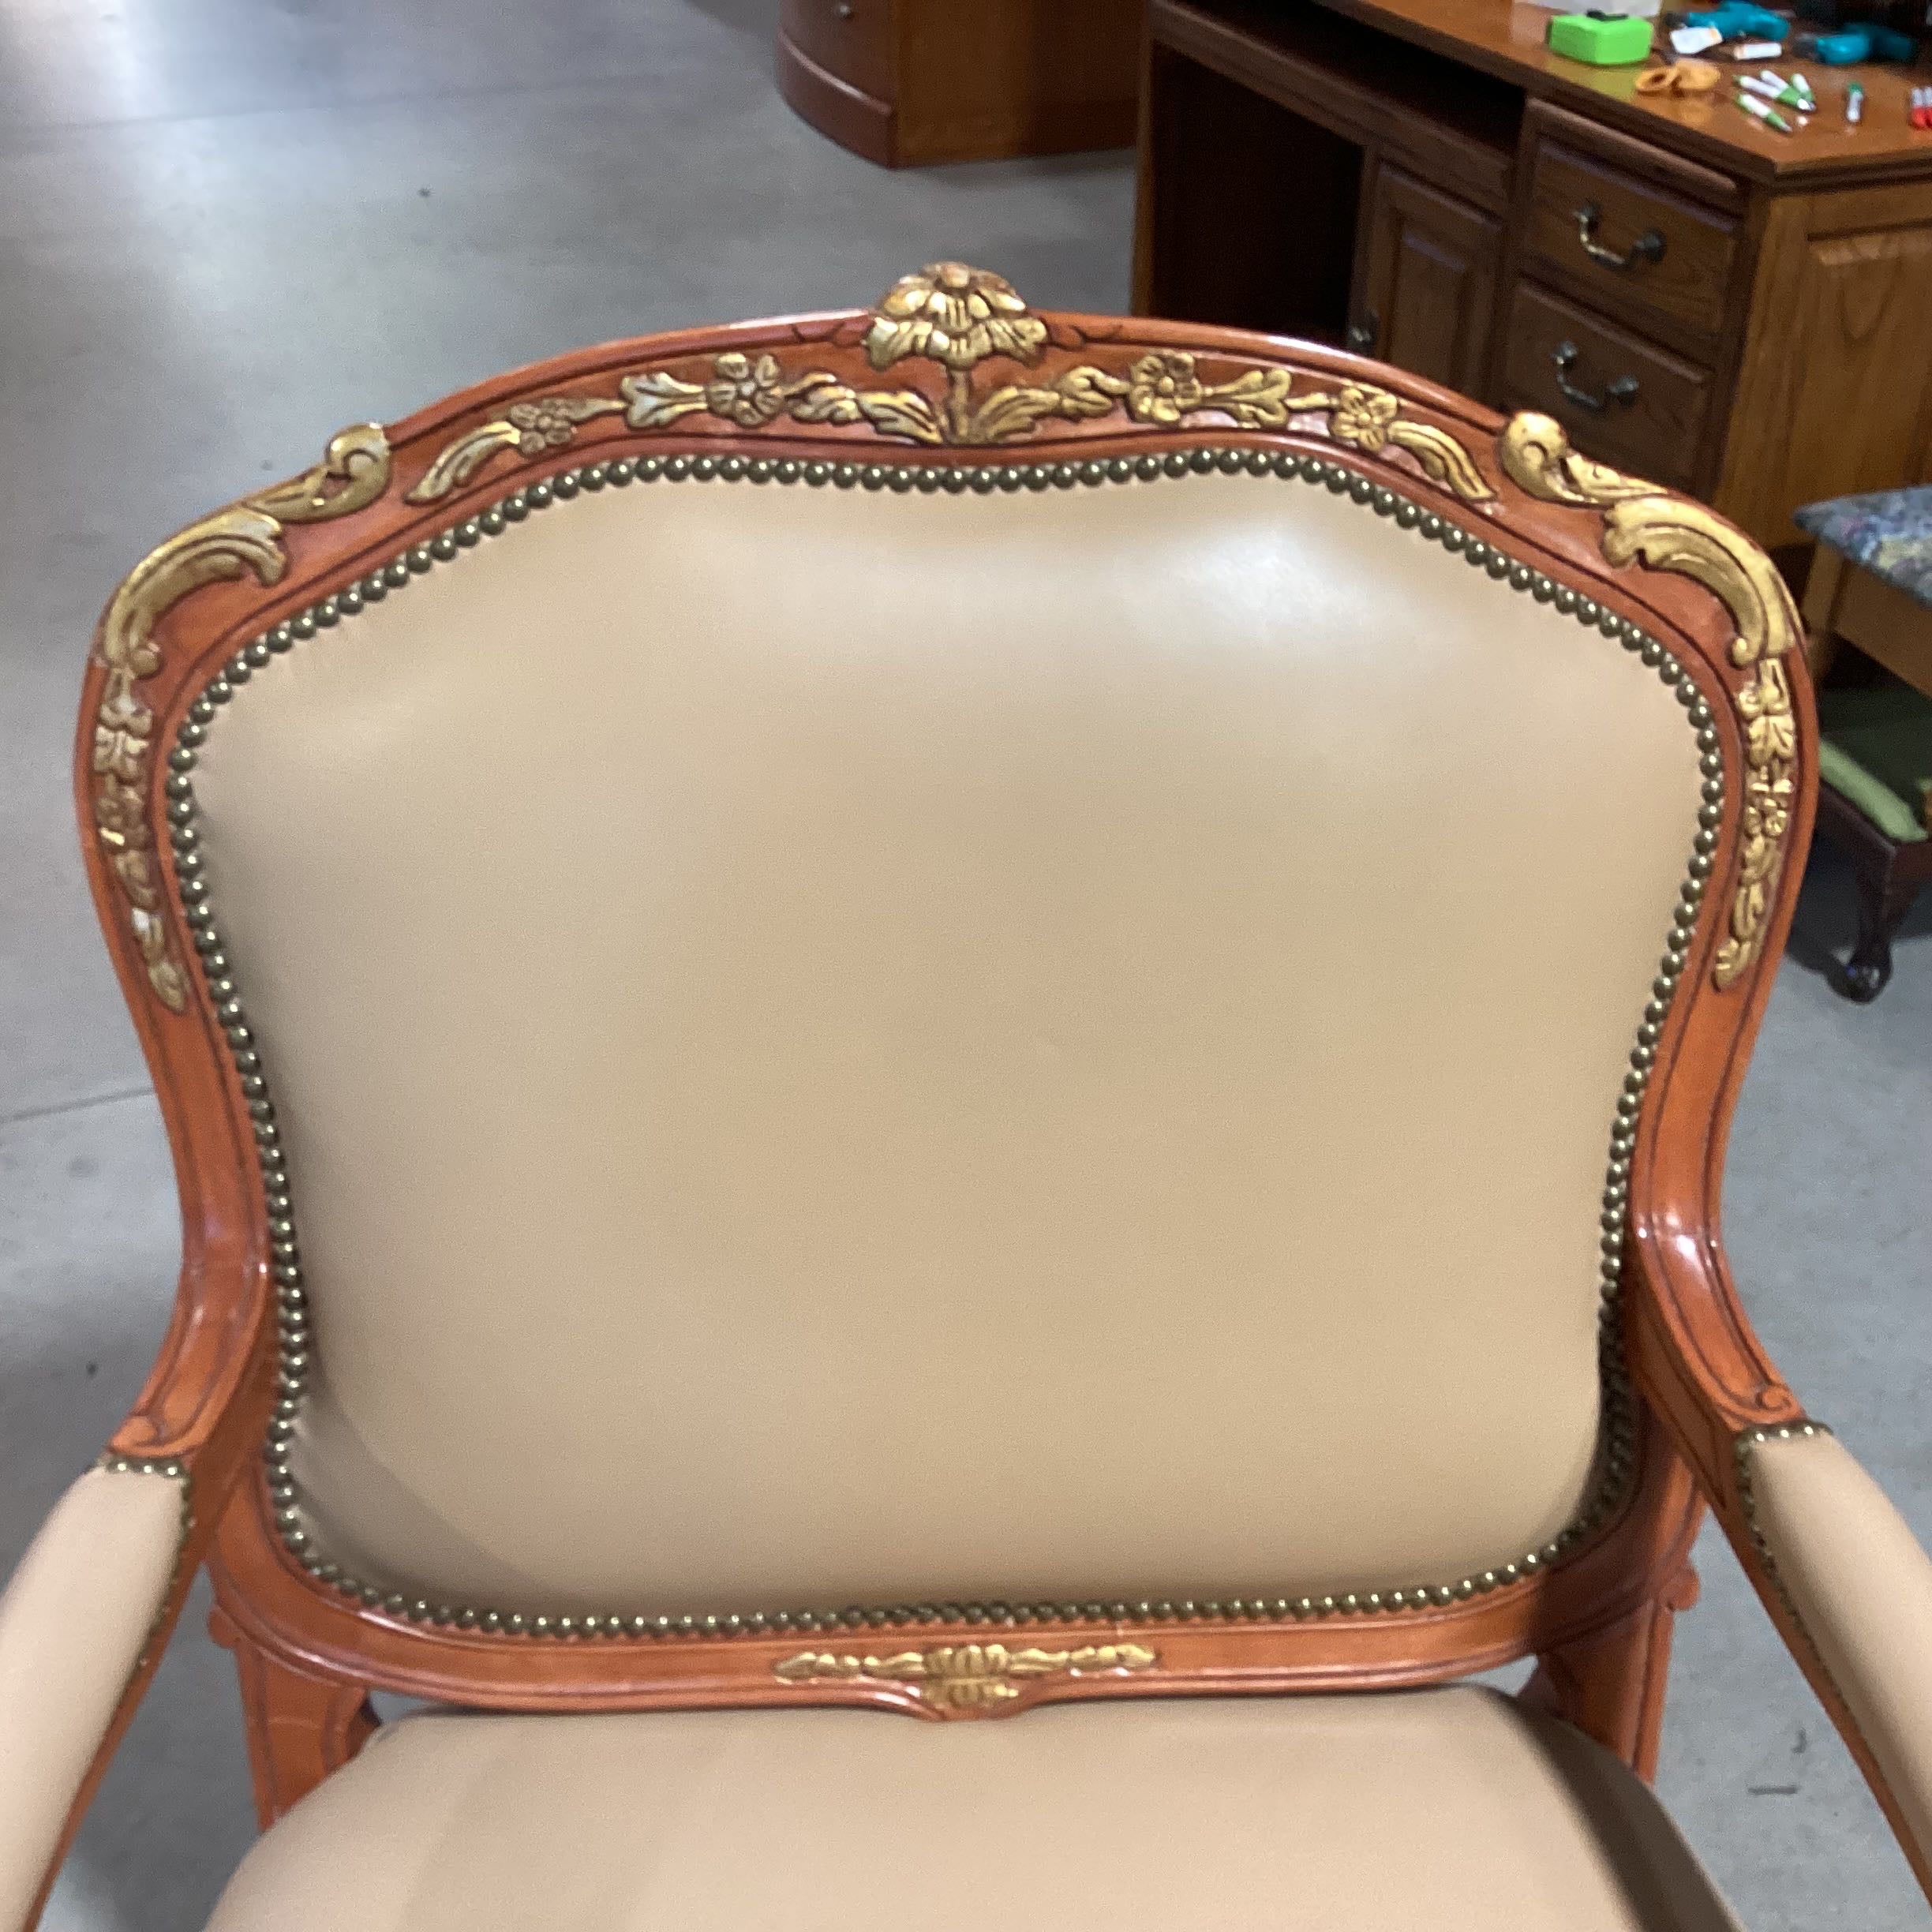 Beverly Interiors Stewart Furniture Carved Wood Gilded Detail Beige Leather Nailhead Chair